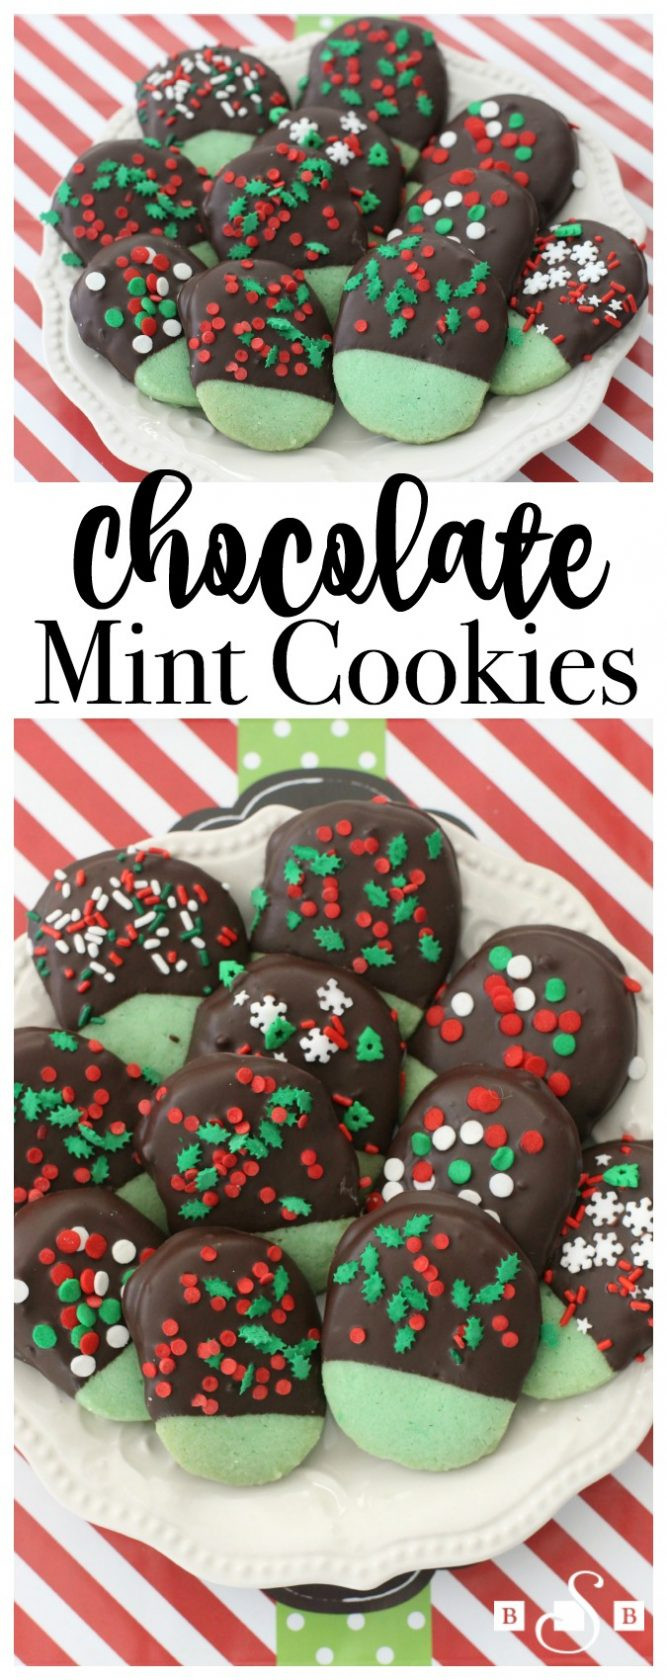 The Best Christmas Cookies
 50 of the BEST Christmas Cookie Recipes Kitchen Fun